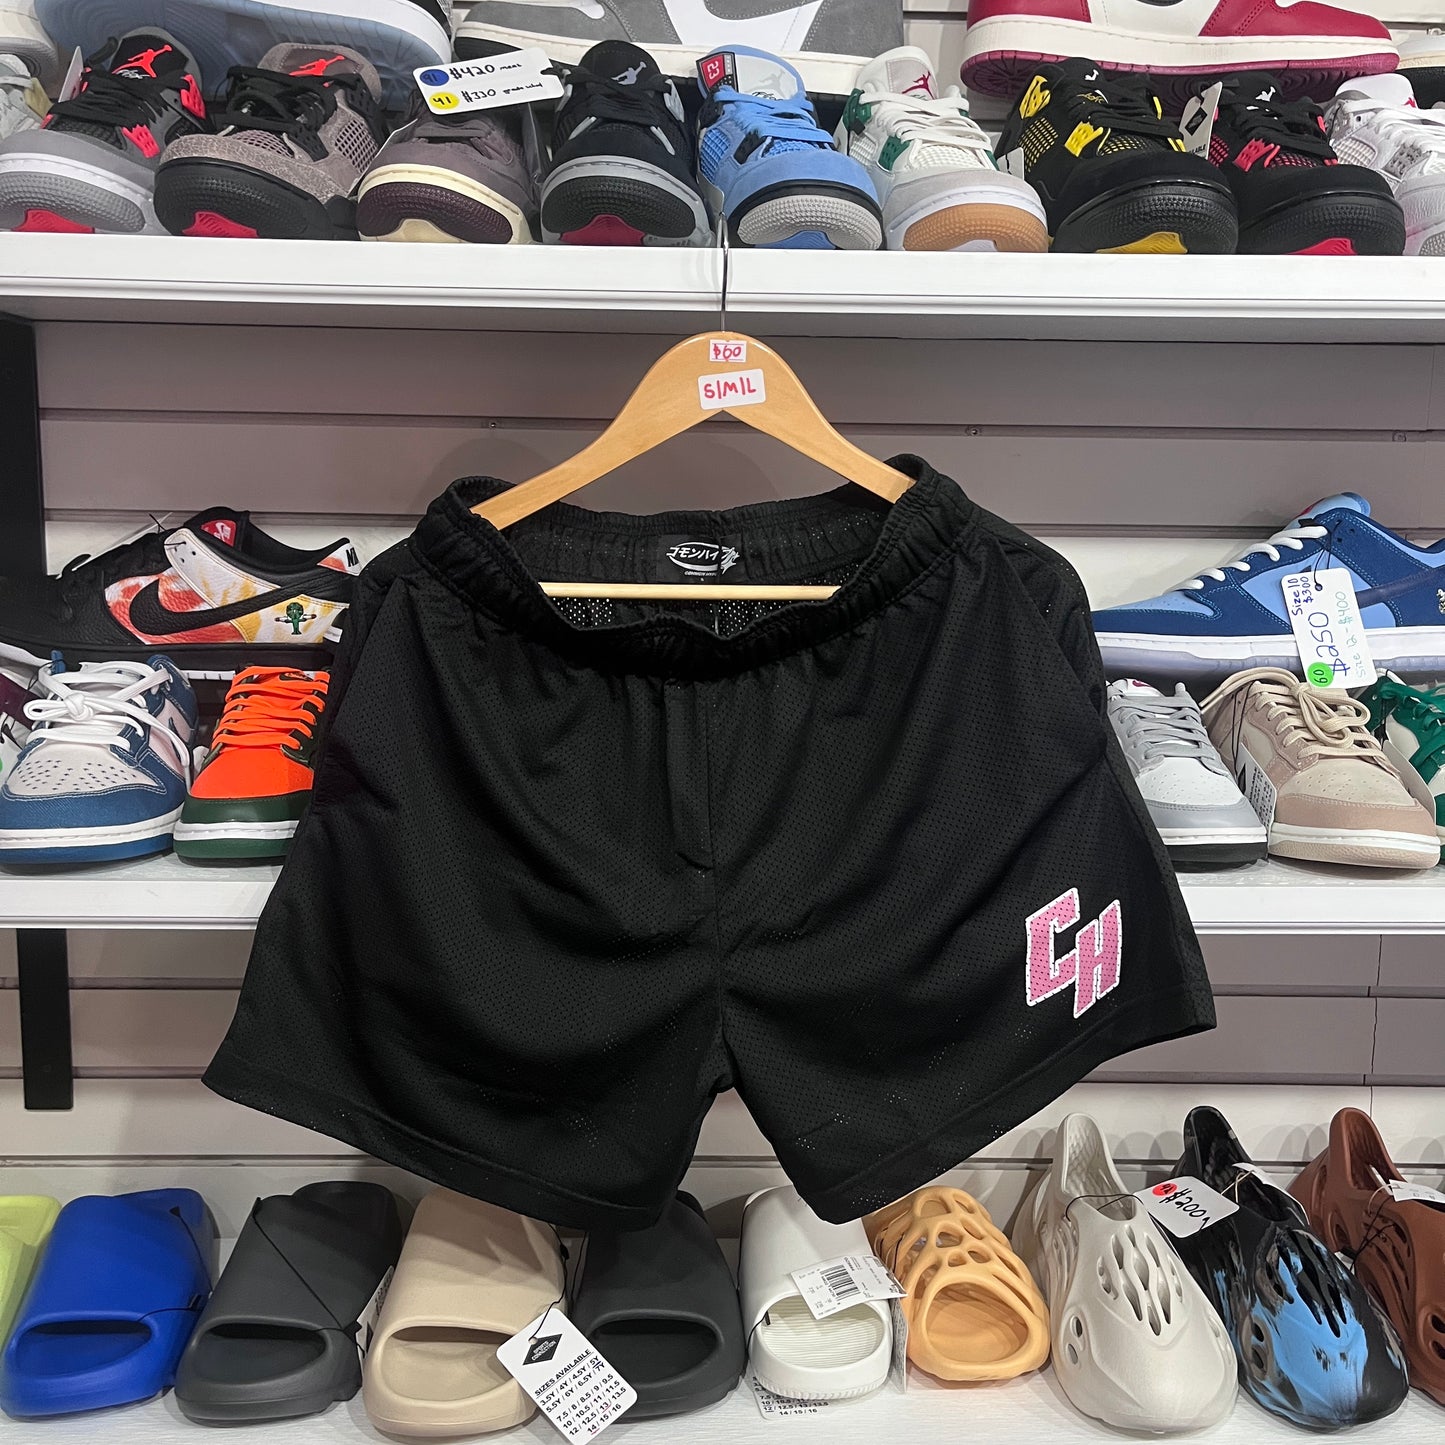 Common Hype Breast Cancer Shorts